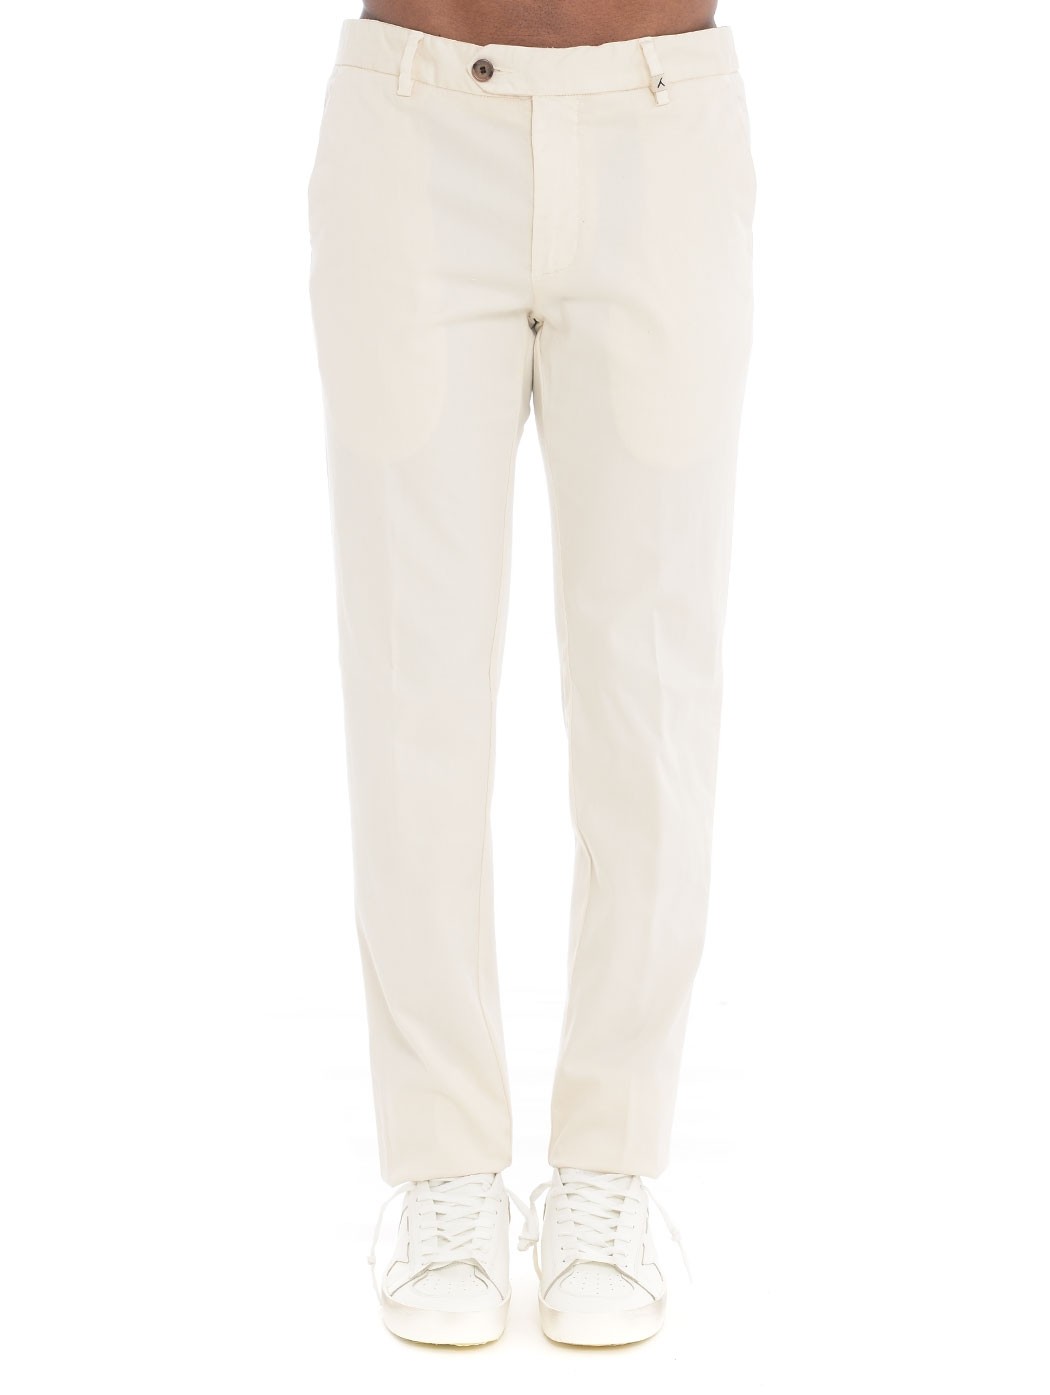  MAN TROUSERS,SPRING SUMMER TROUSERS,COTTON TROUSERS,SKIN FIT TROUSERS,INCOTEX TROUSERS,JACOB COHEN TROUSERS,NEIL BARRETT TROUSERS,MSGM TROUSERS  MYTHS 22M08L-76